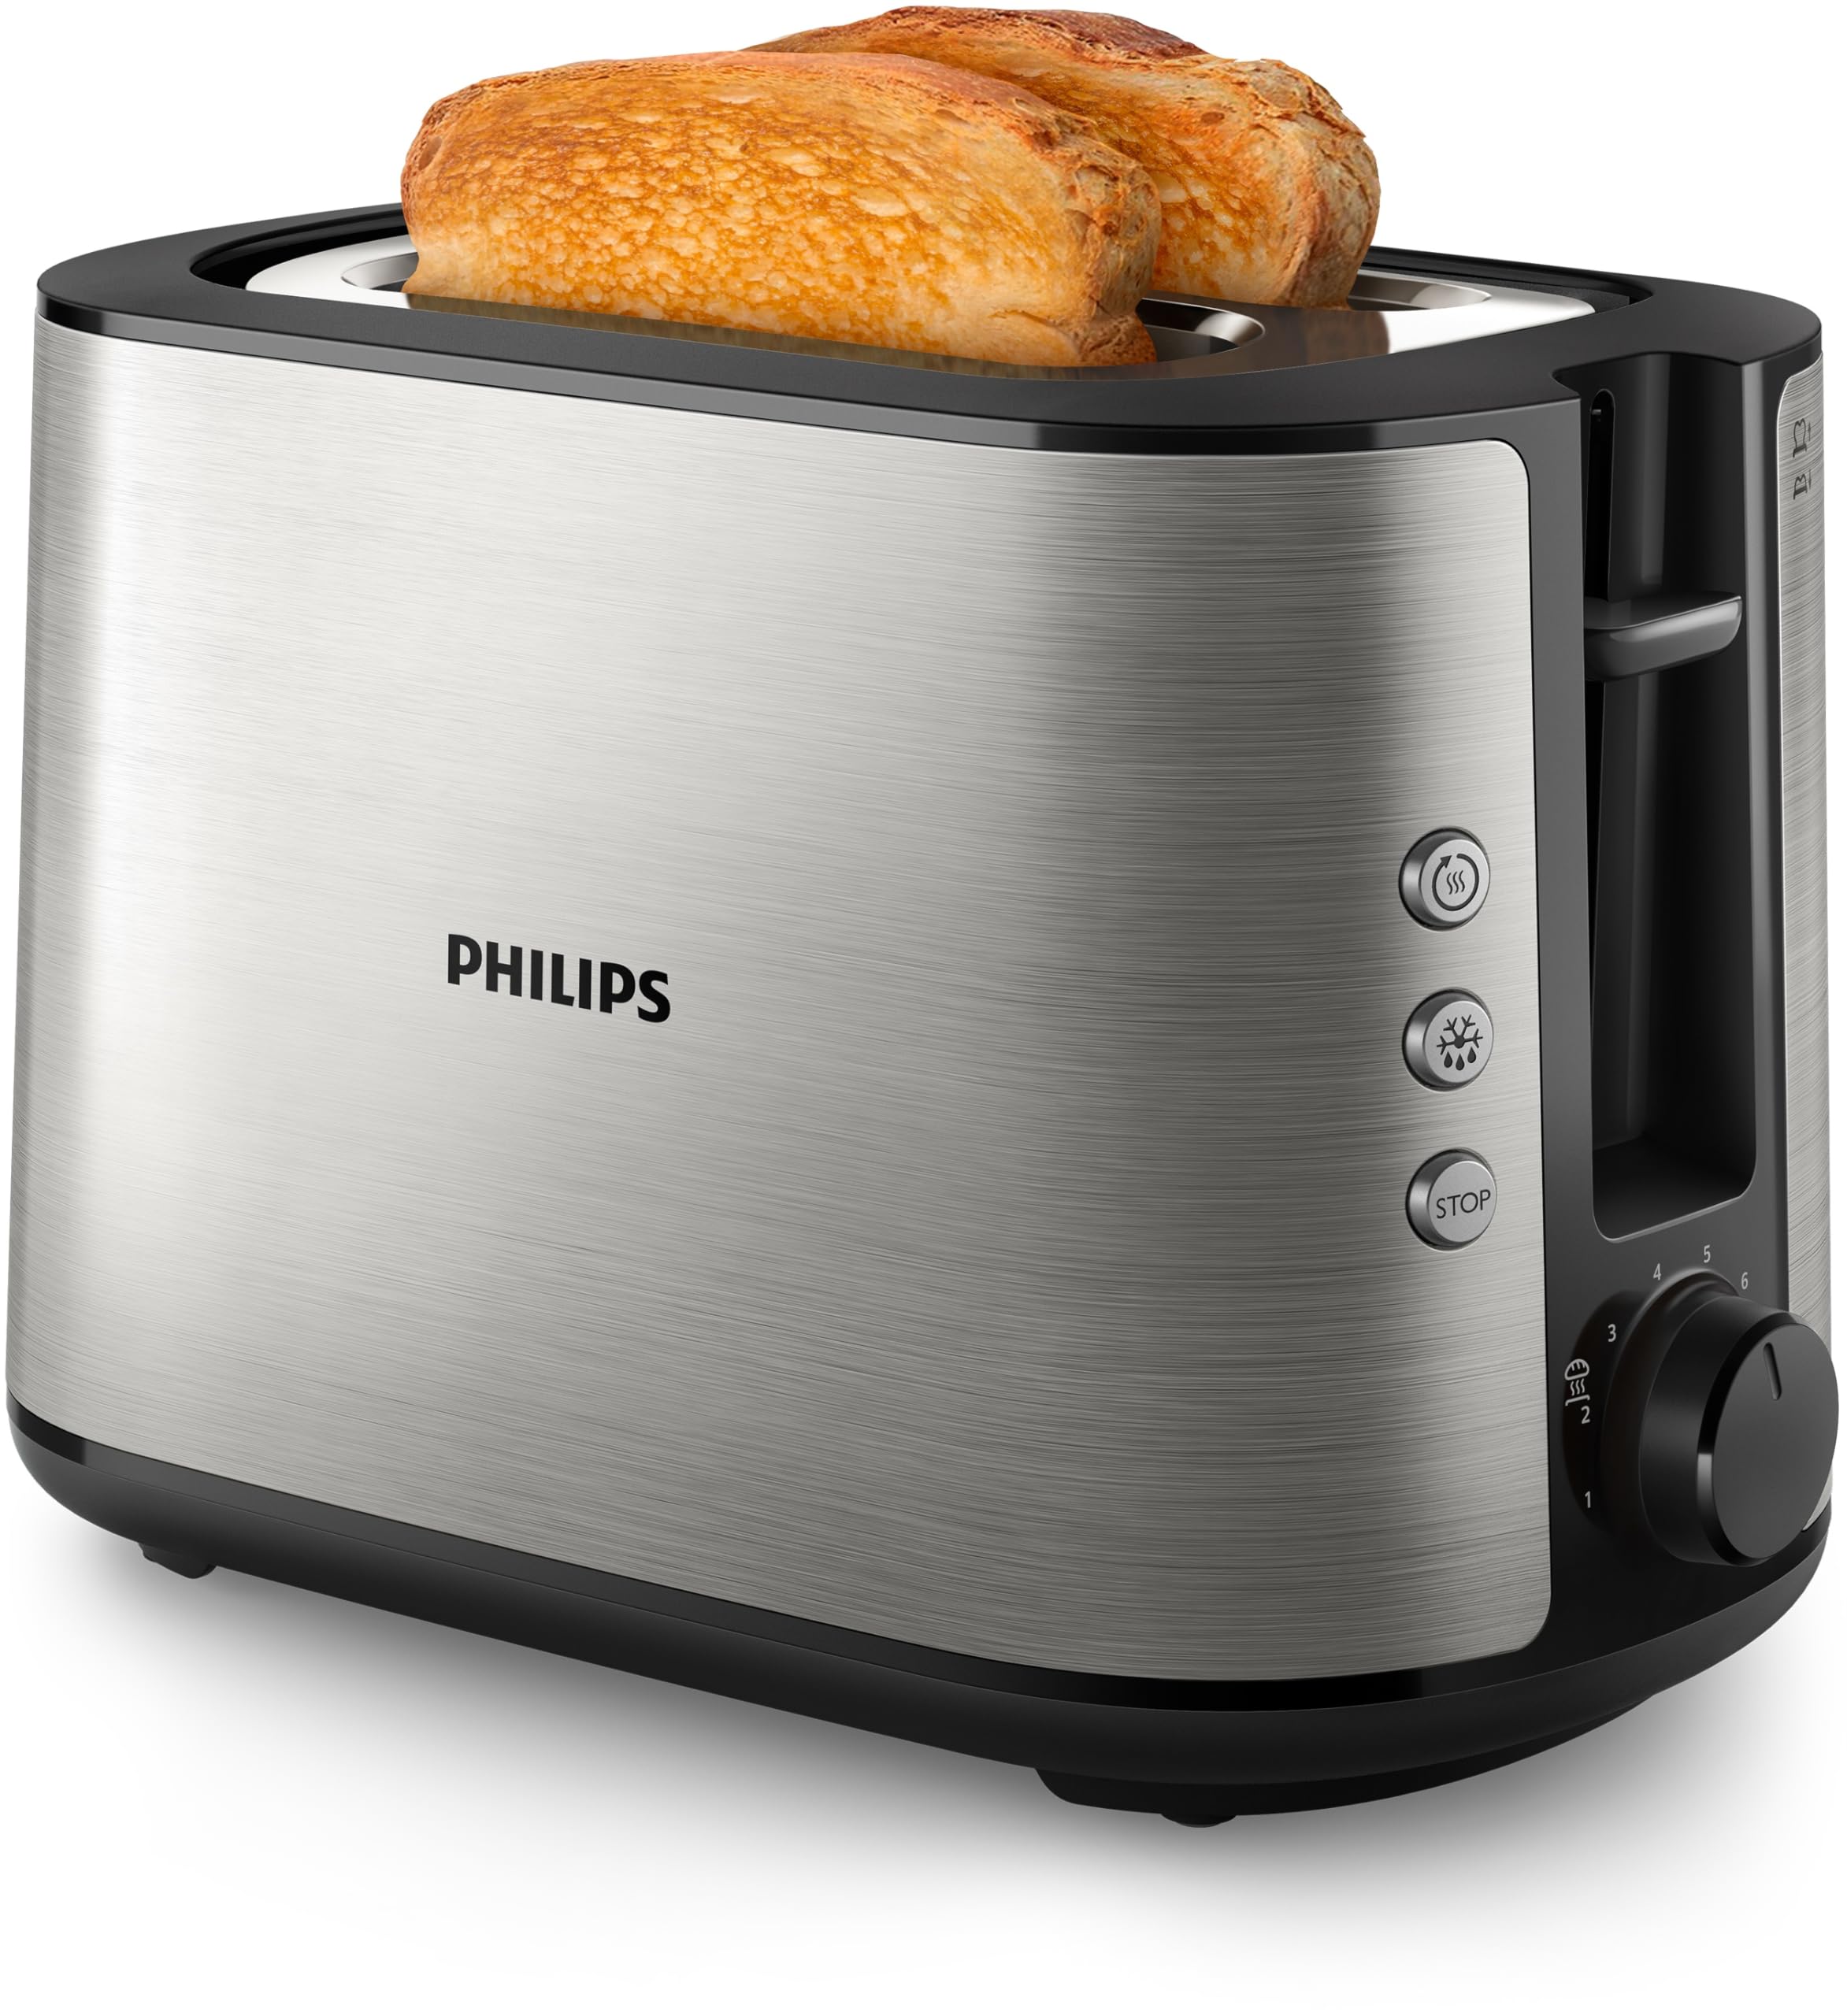 PHILIPS Viva Collection Toaster, Hd2650/91, Stainless Steel/Black